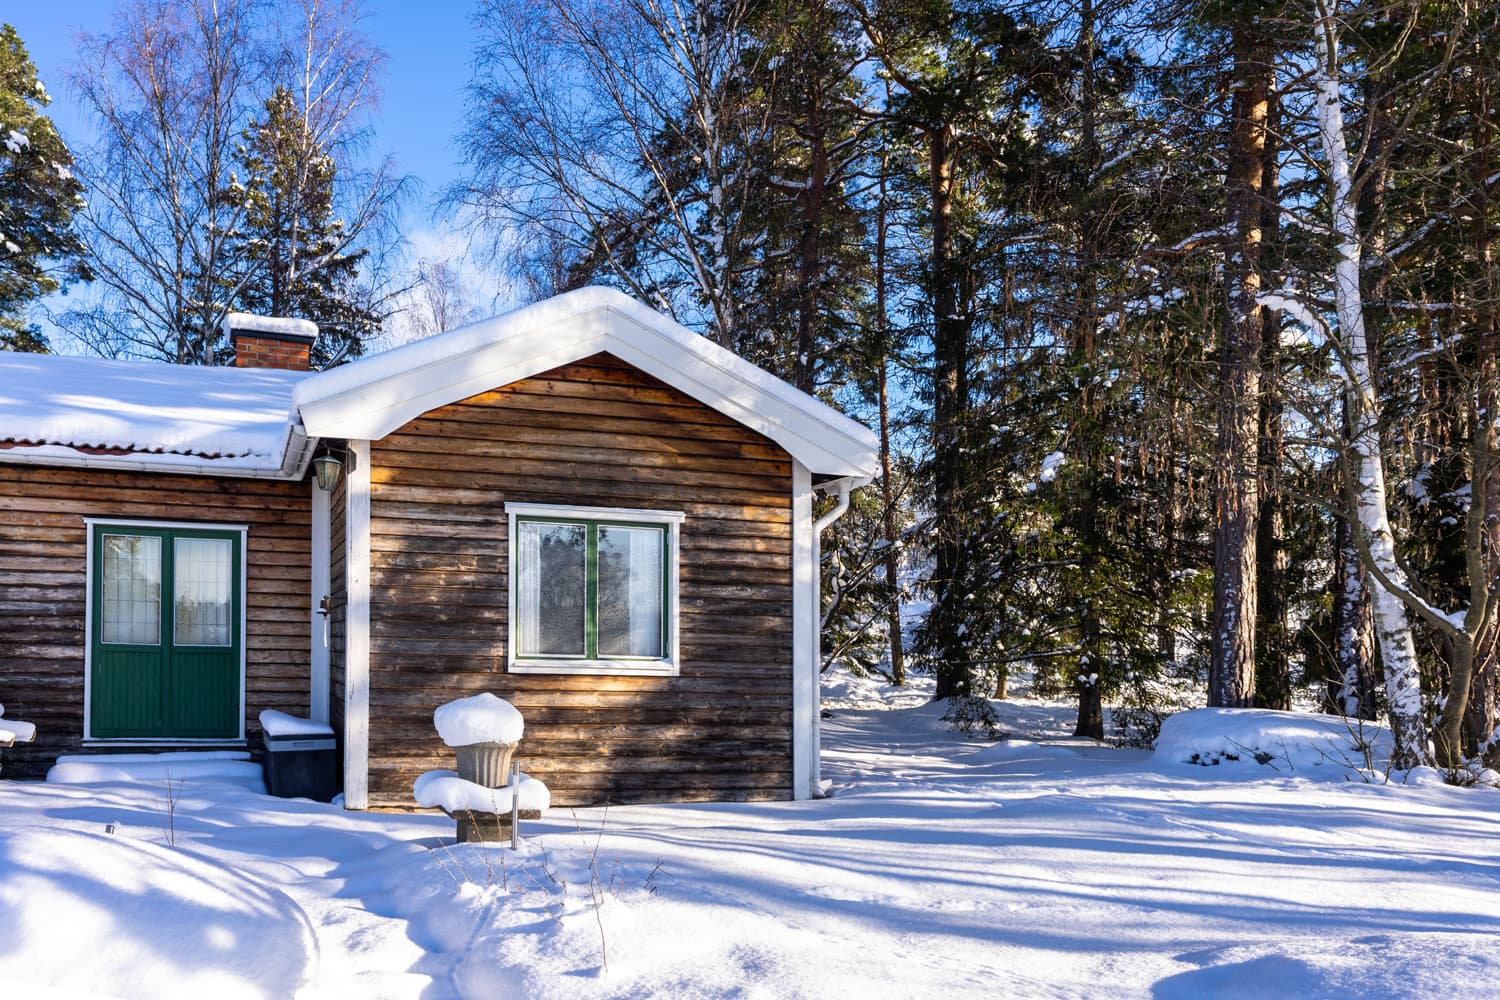 The cabin or small cottage is made of natural wood surrounded by high trees. 